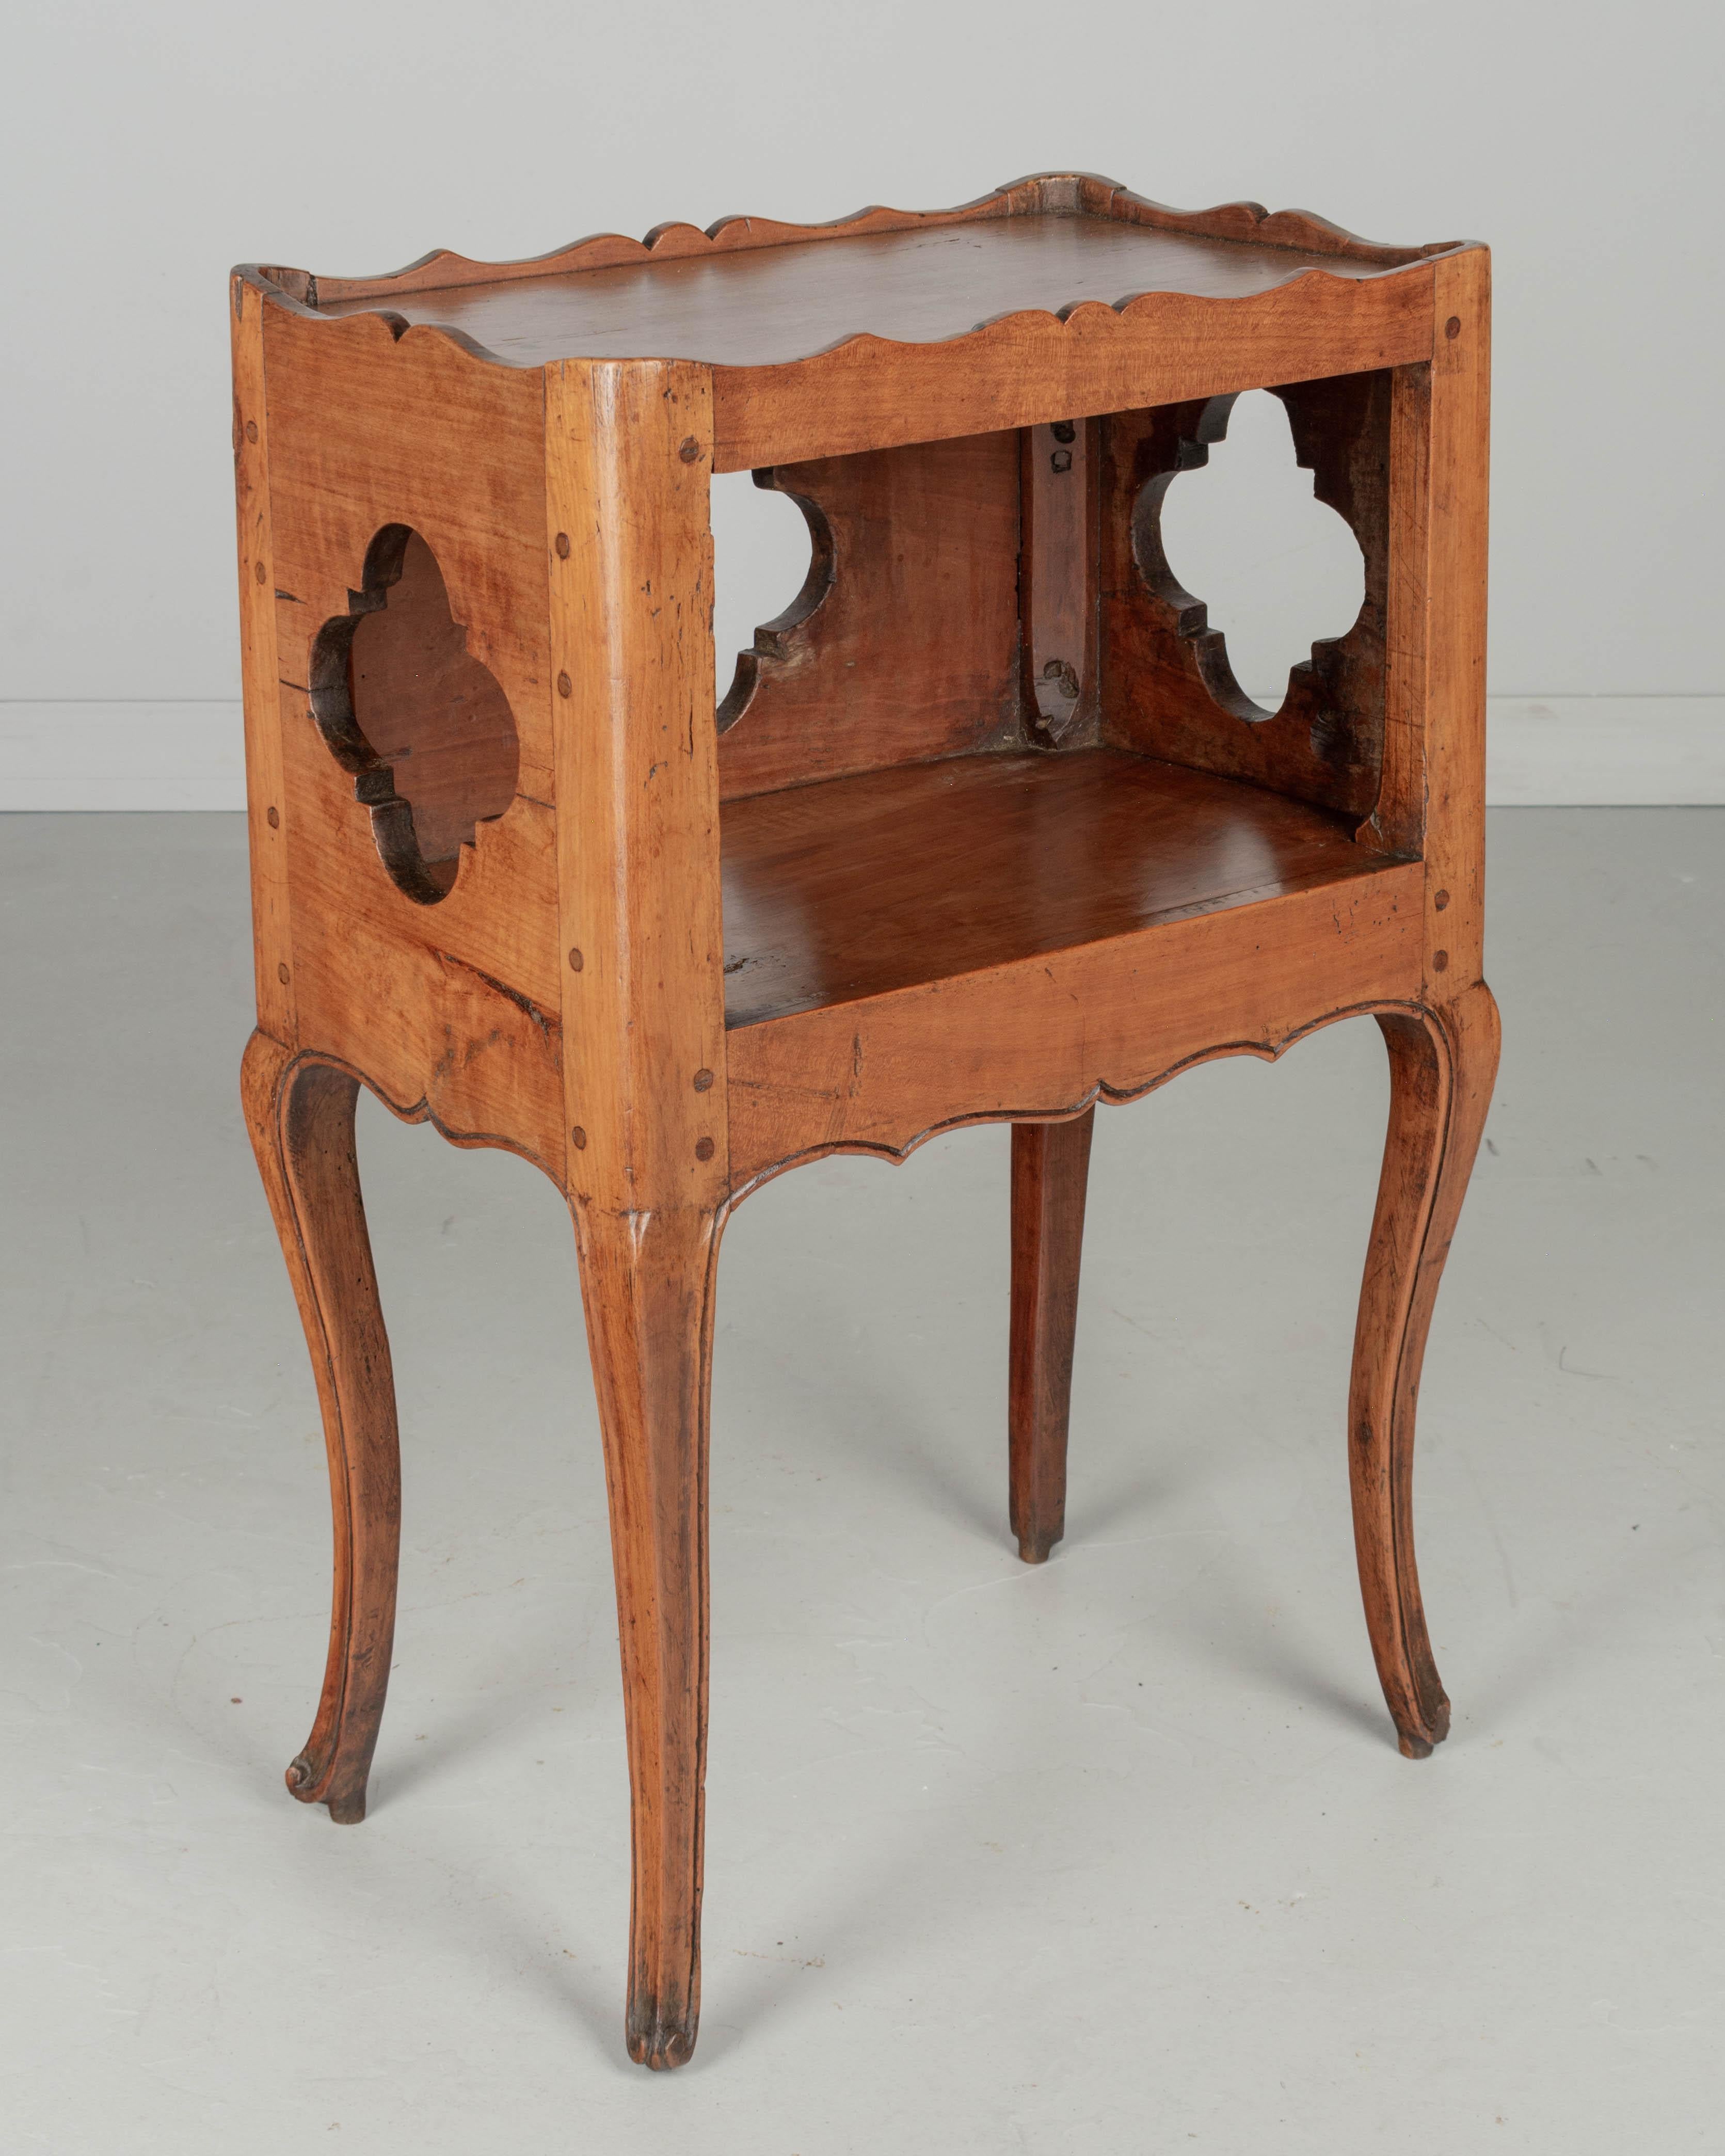 An 18th century Louis XV Country French side table or nightstand made of solid cherry, with open niche and pierced quatrefoil shape cut-outs on the sides and back. Small dovetailed side drawer. Scalloped apron and gallery. Slender curved legs ending